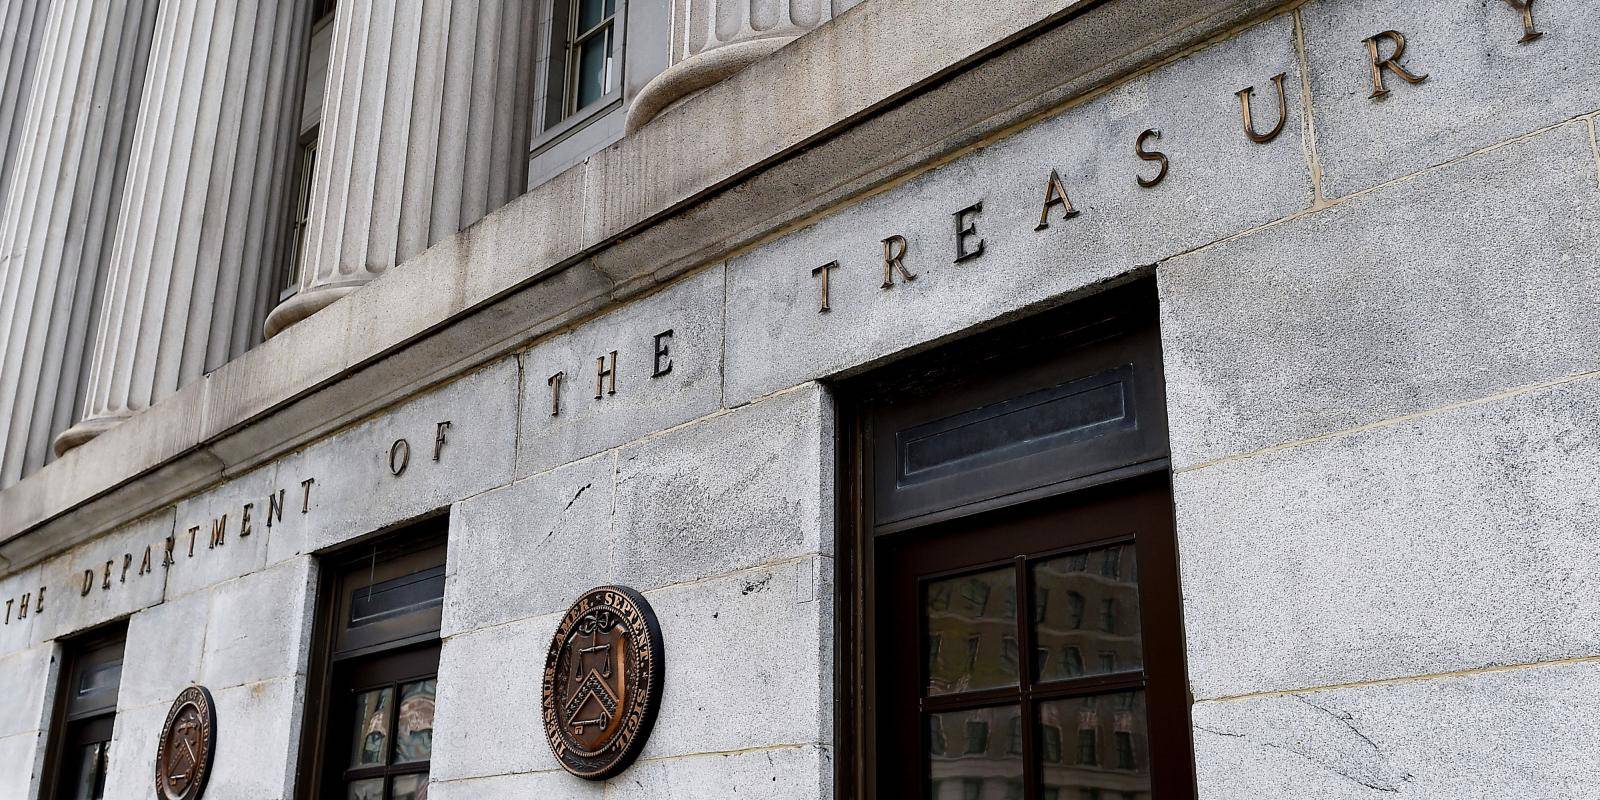 An exterior view of the building of the US Department of the Treasury, in Washington, DC